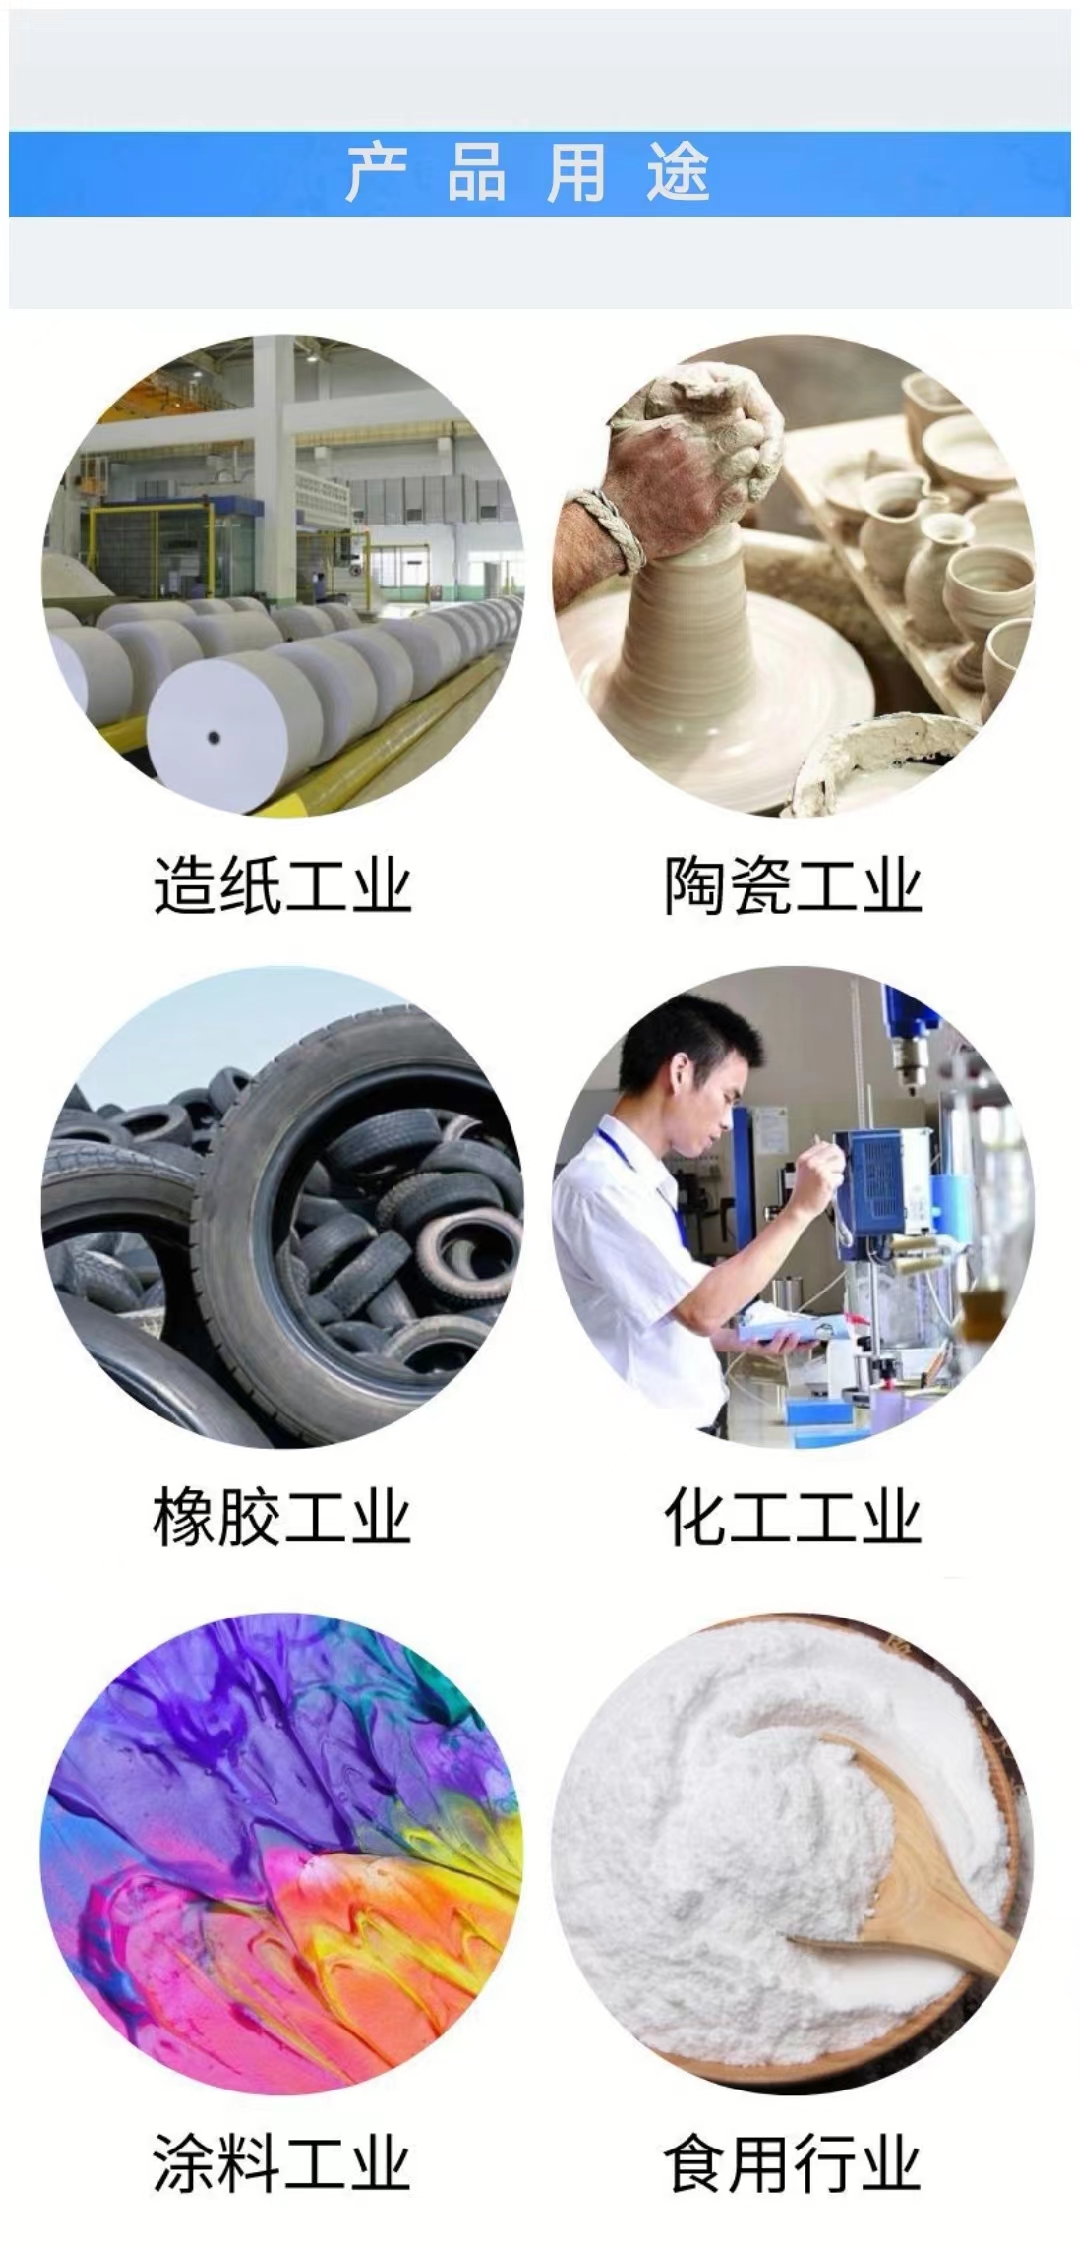 Chuanxin Wholesale Kaolin Water Wash Kaolin Powder Ceramic Refractory Materials with Complete Mesh Number for Paper Making